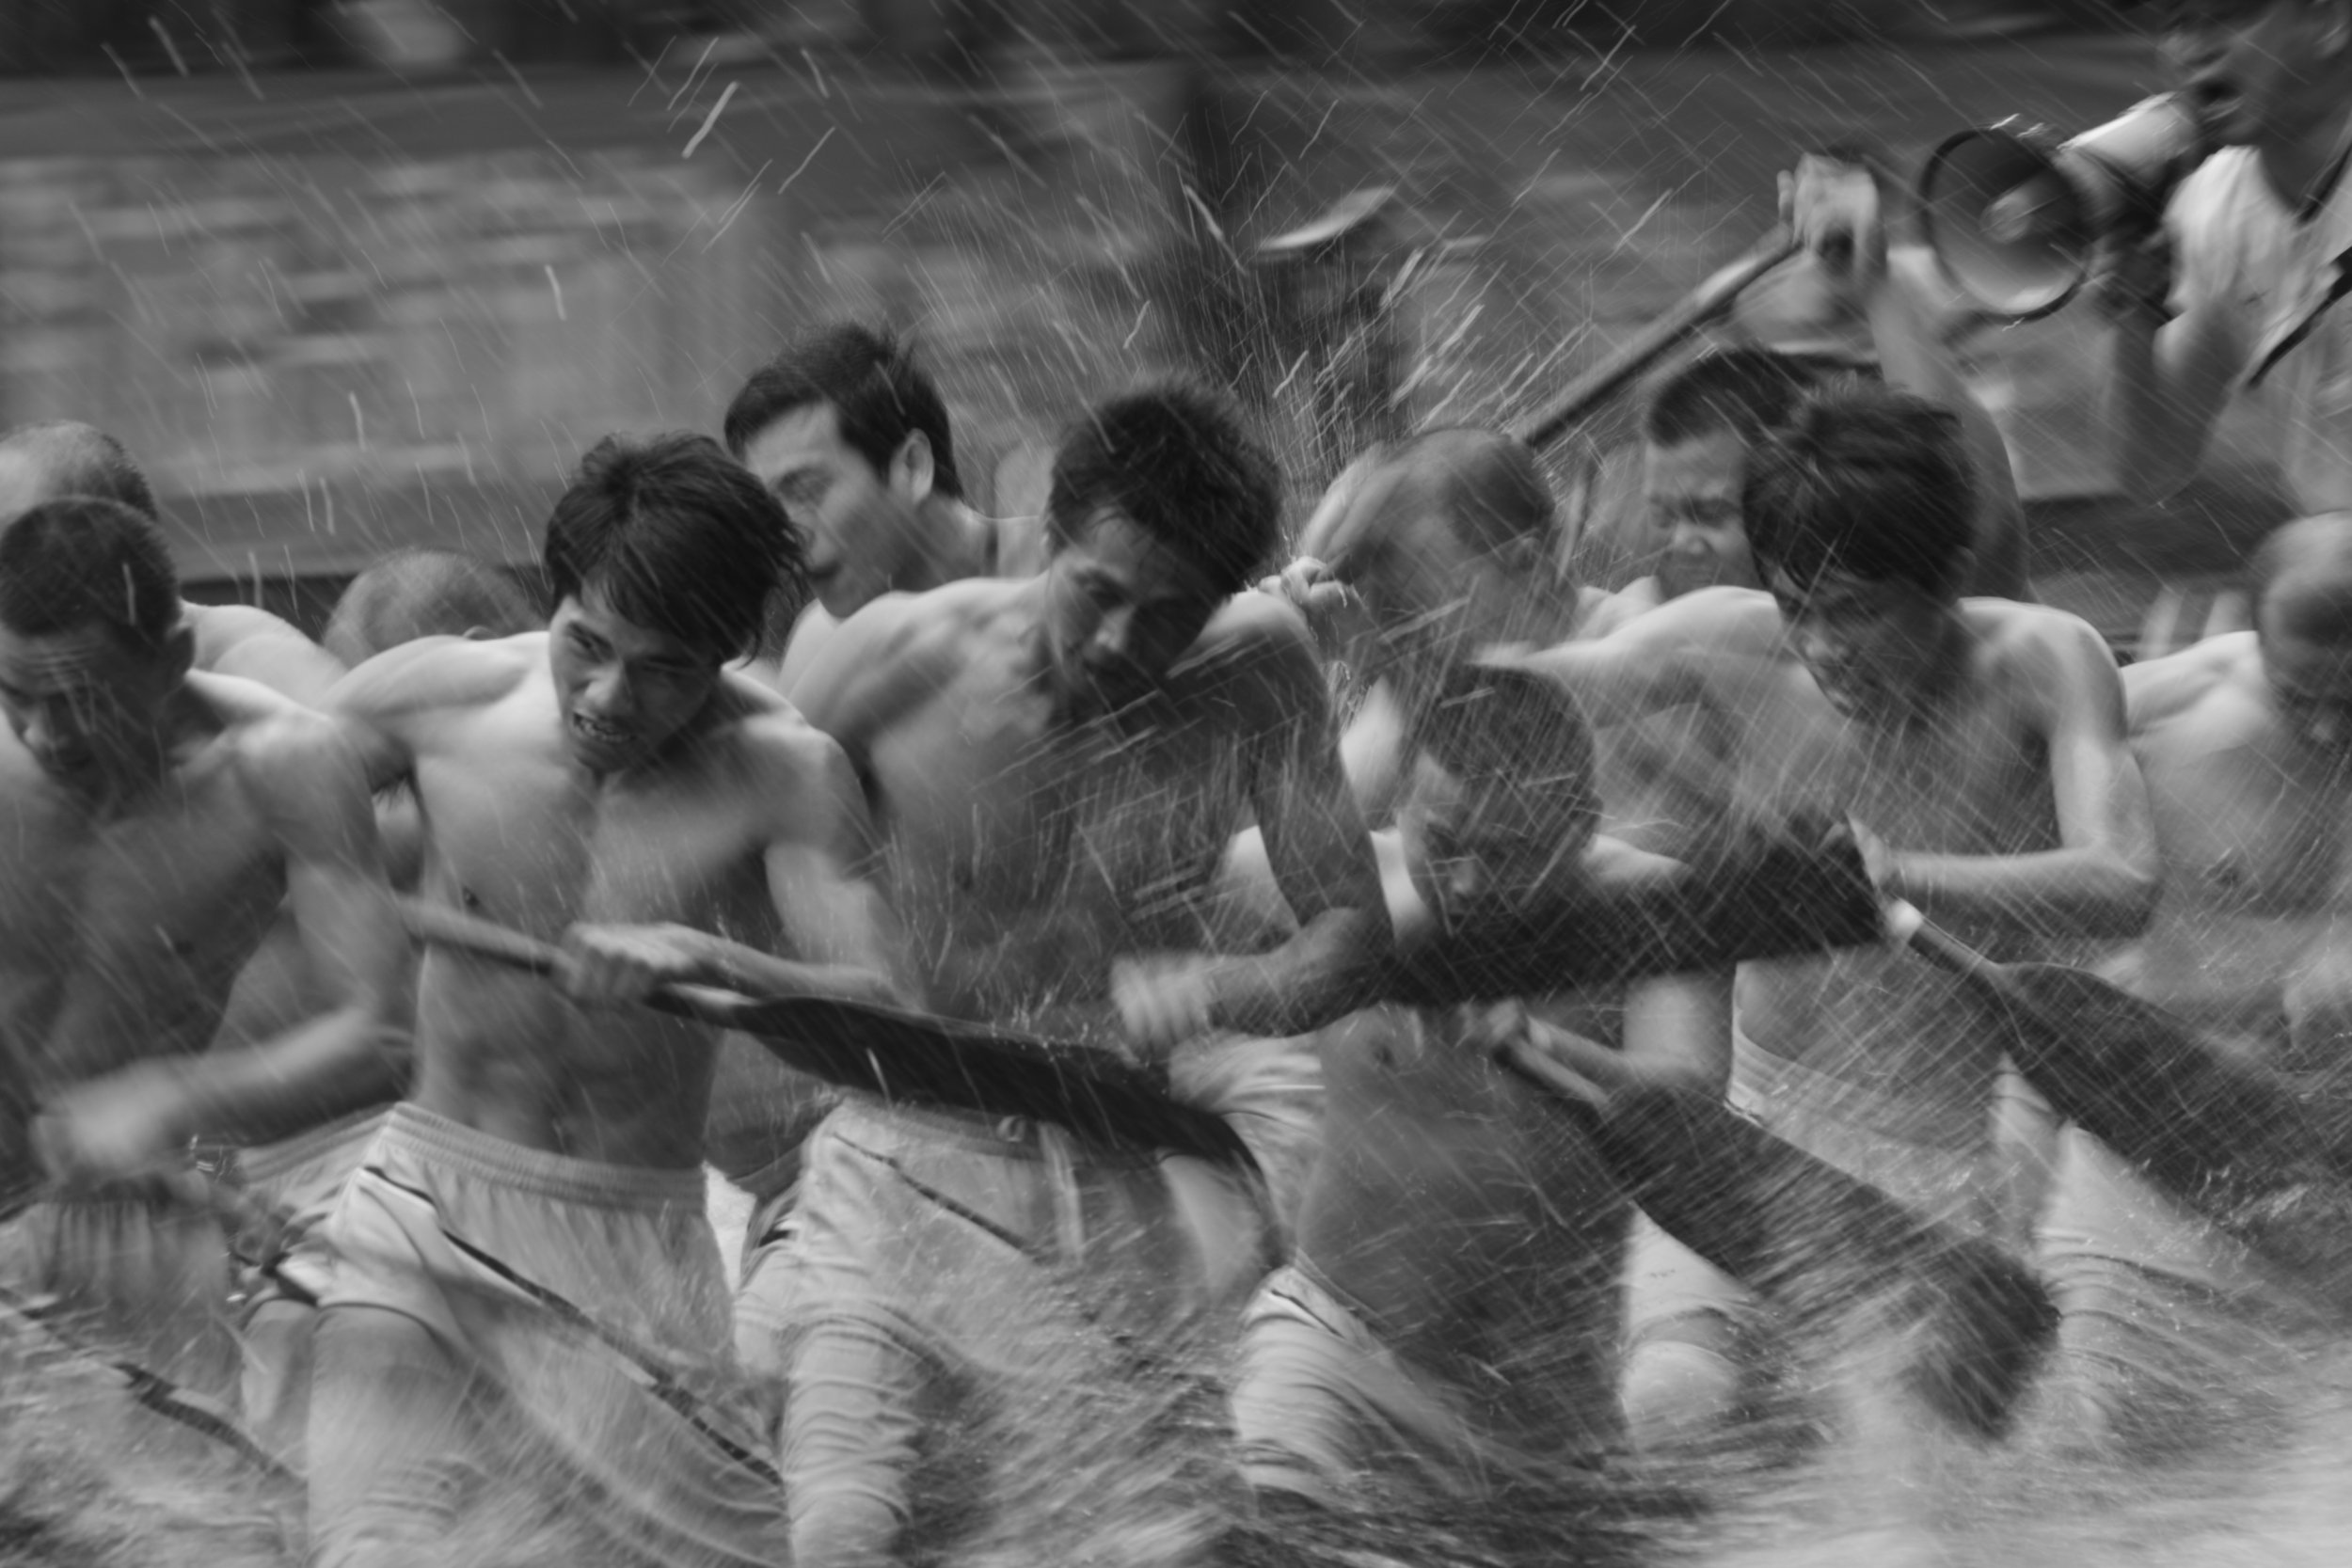 Chinese traditional dragon boat racing